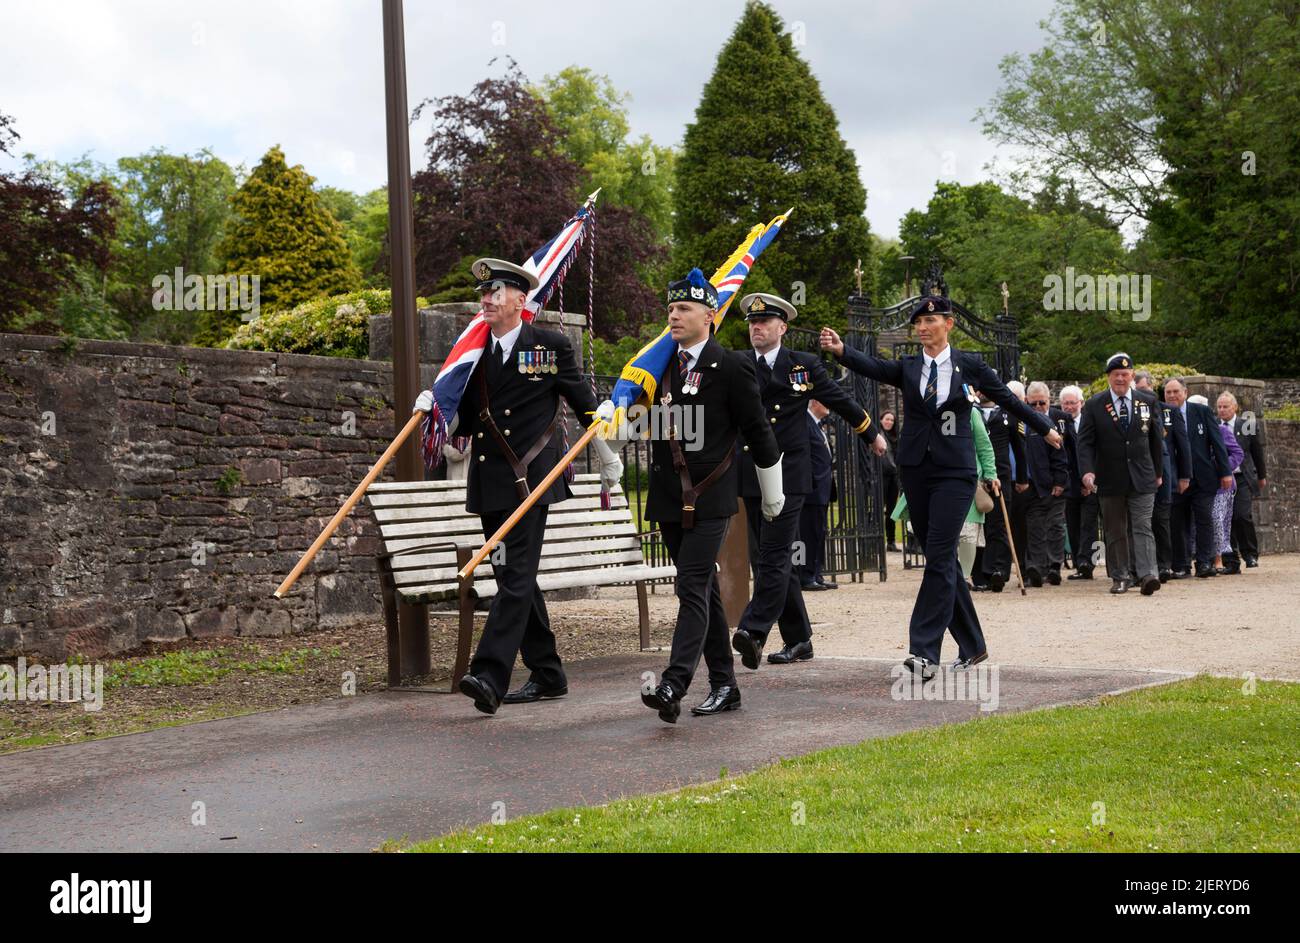 British Legion members marching behind their new Standard. Standard bearer and guard. Helensburgh Branch, Scotland Stock Photo